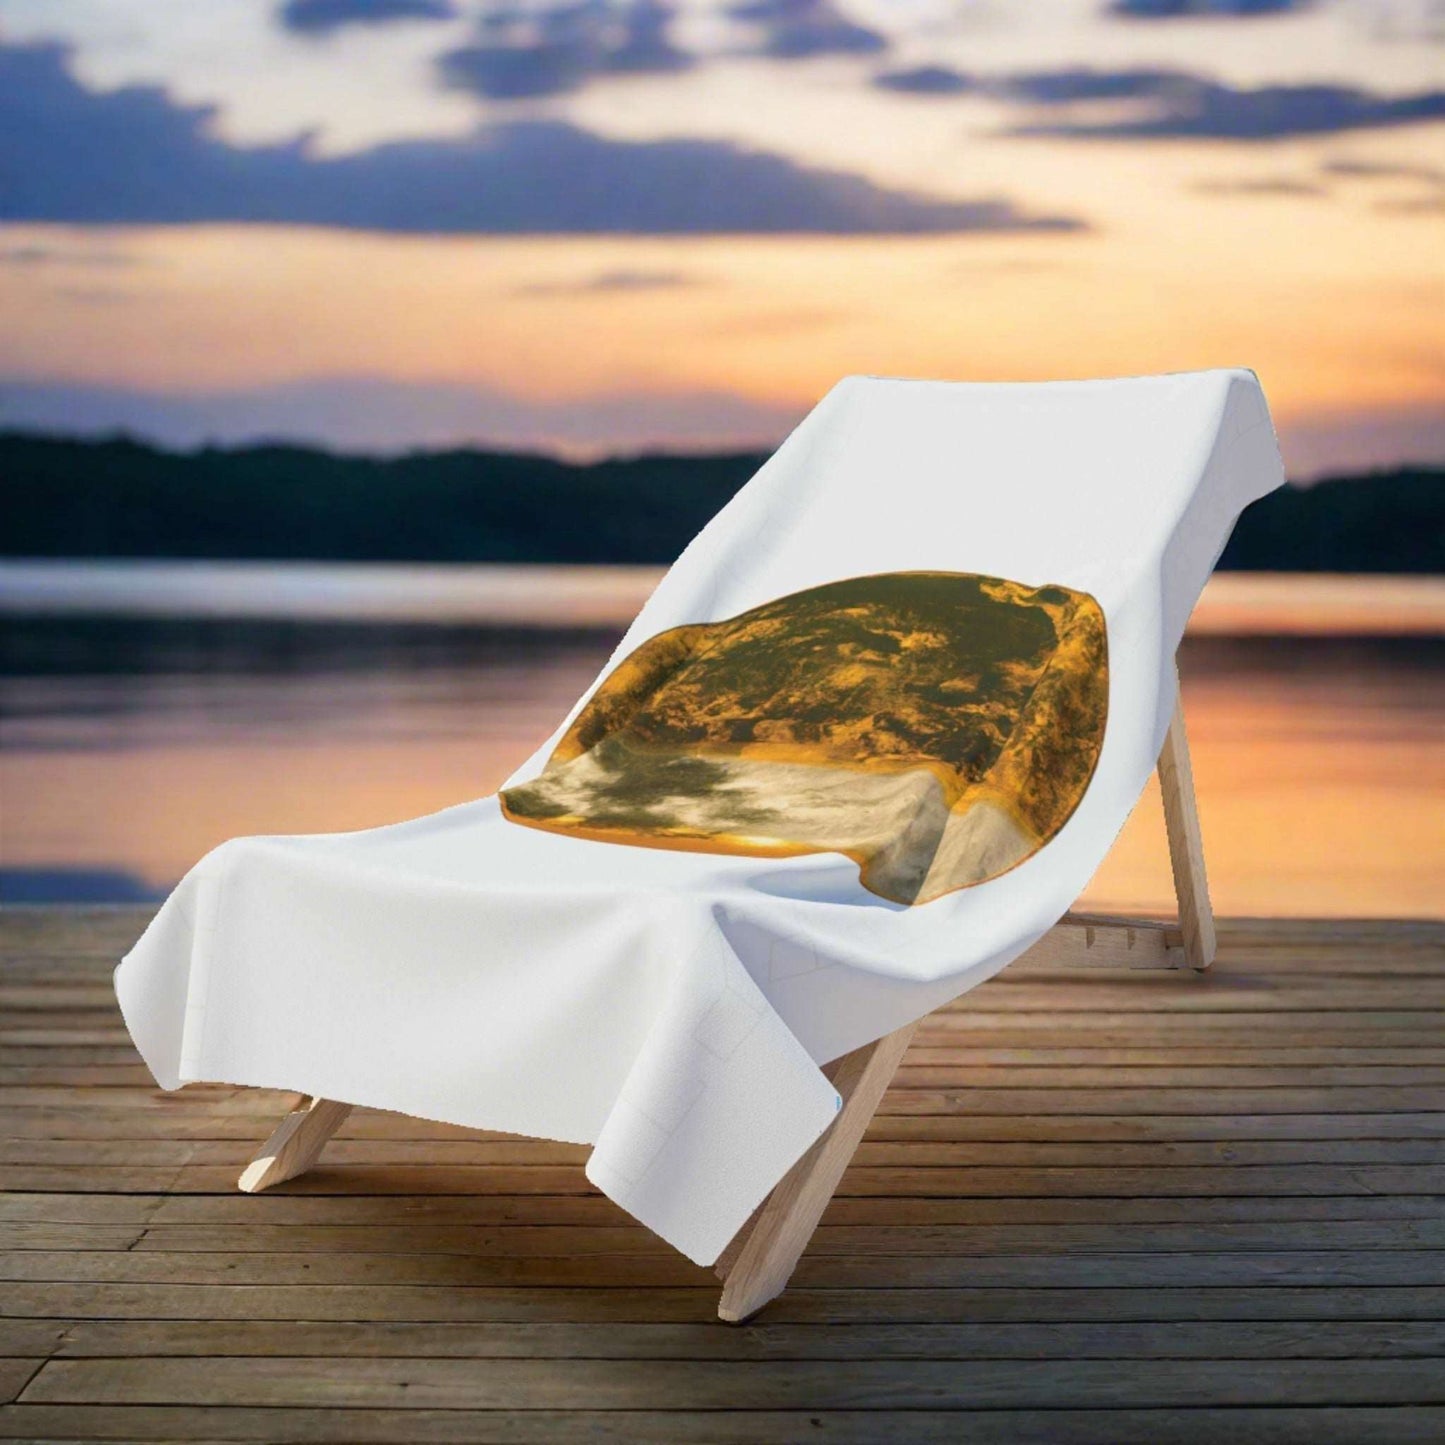 As evening falls, the Gilded Twilight Collection bath towel 36"x72" lies on a wooden deckchair by a tranquil lakeside. The last rays of the sun cast a golden glow over the scene, mirroring the towel’s warm hues. The water and sky provide a serene backdrop of deepening blues and greens, highlighting the towel's rich design